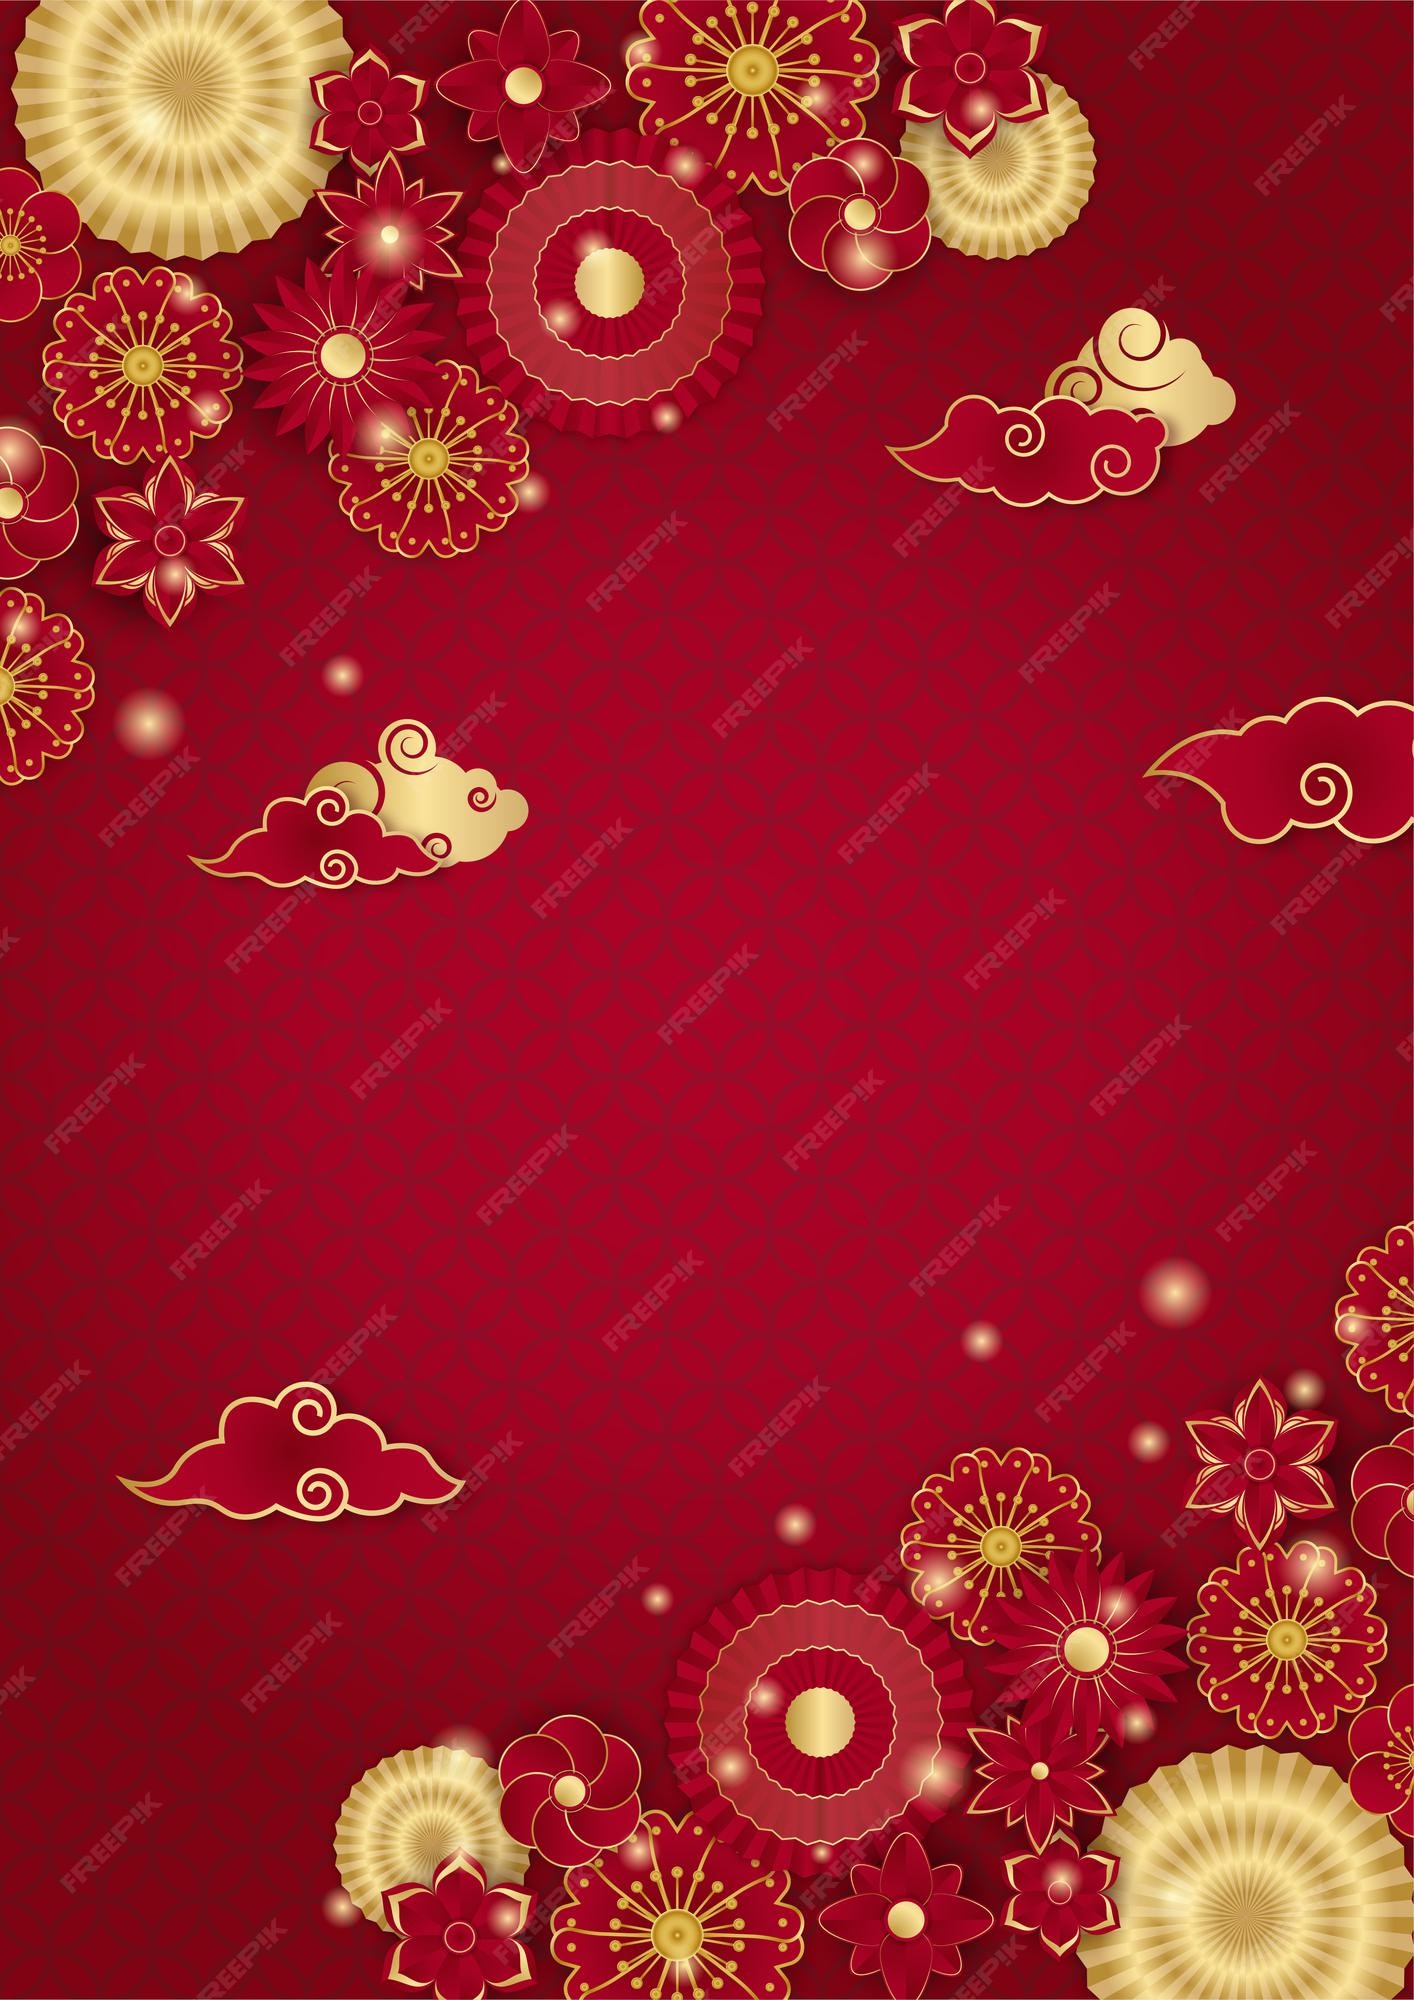 Premium Vector | Red and gold happy chinese new year festival banner  background design. chinese china red and gold background with lantern,  flower, tree, symbol, and pattern. red and gold papercut chinese